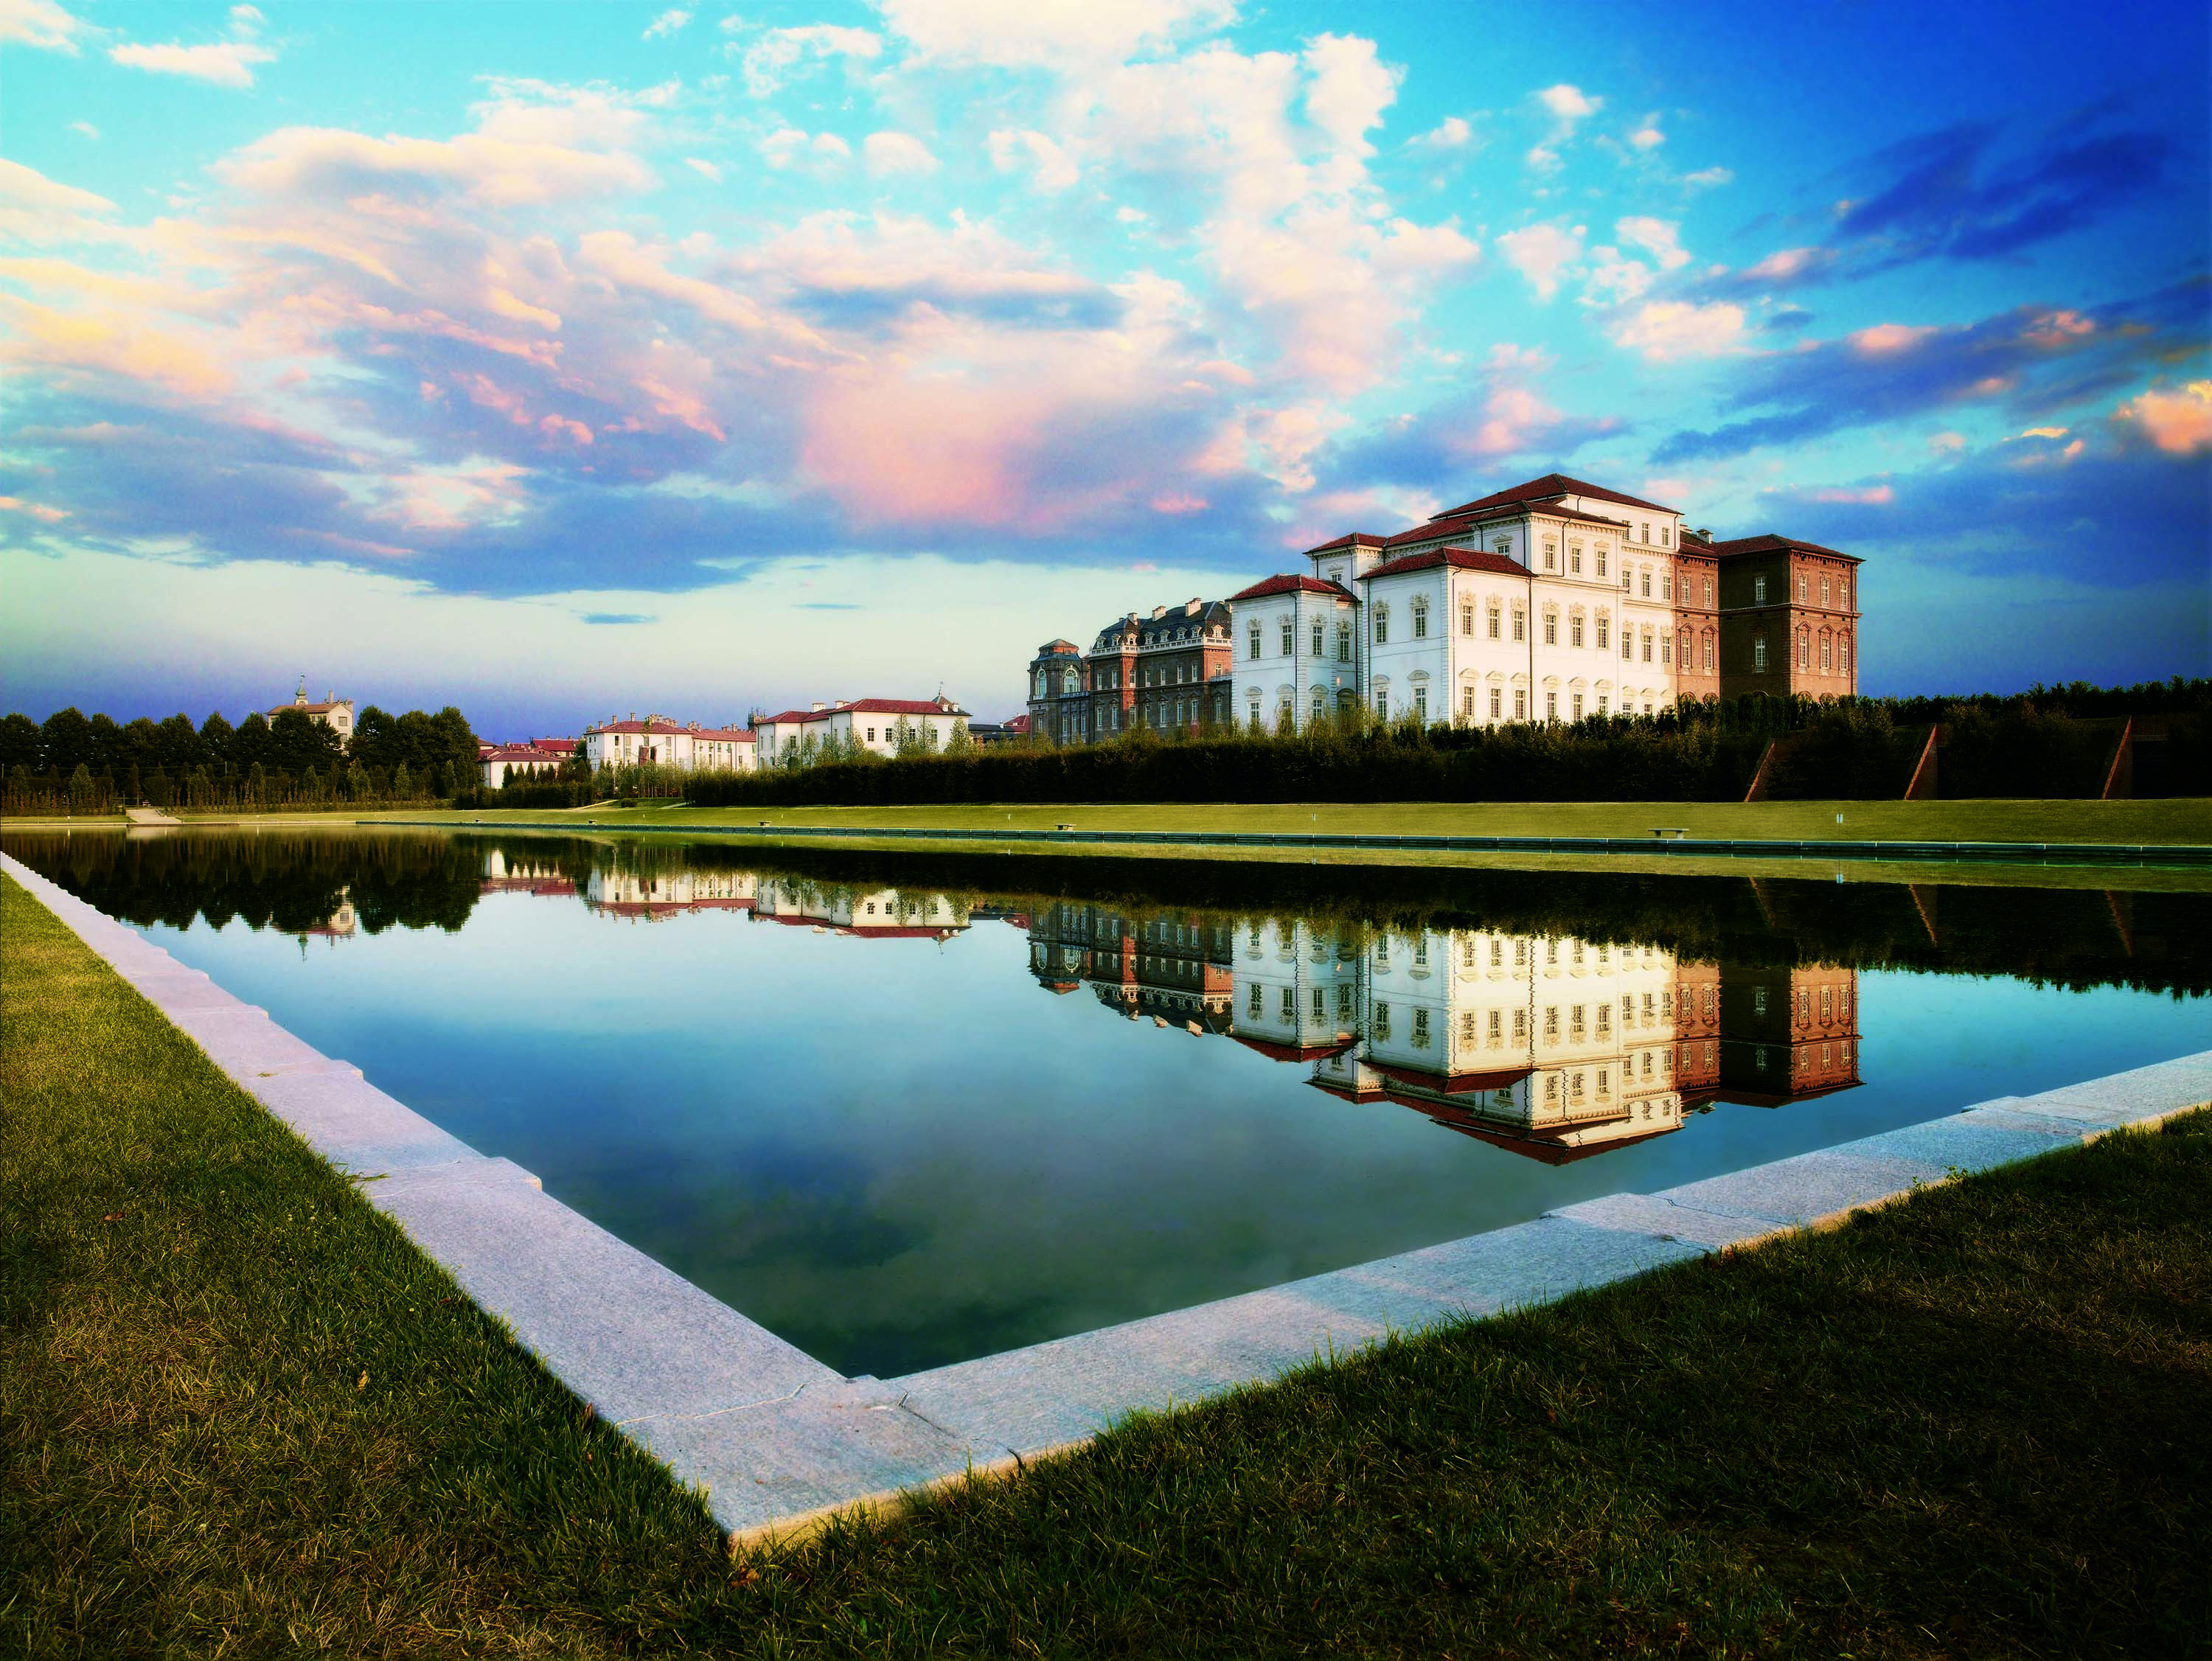 What to see in Venaria Reale